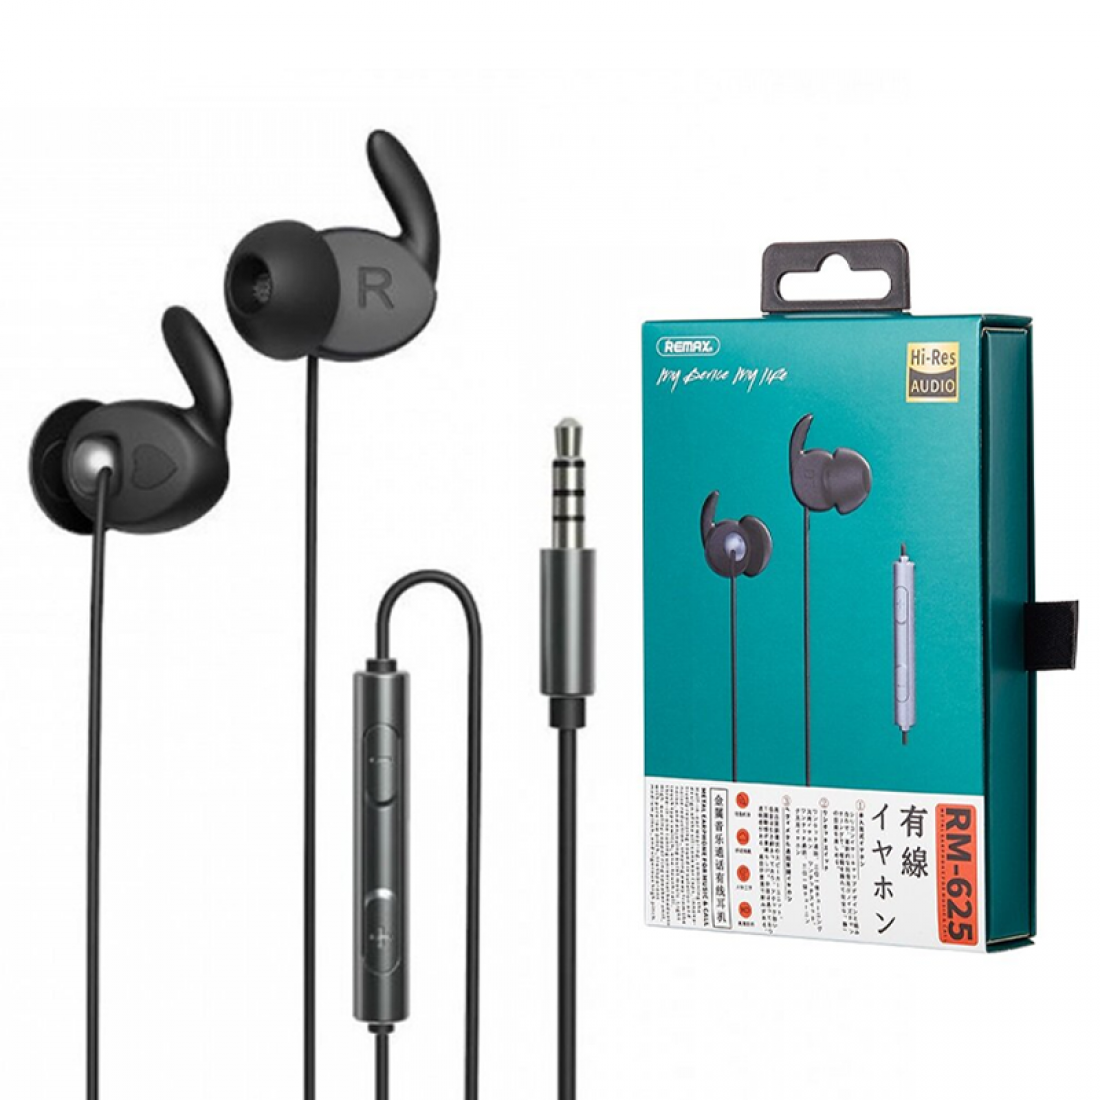 Remax RM 625 Wired Earphone